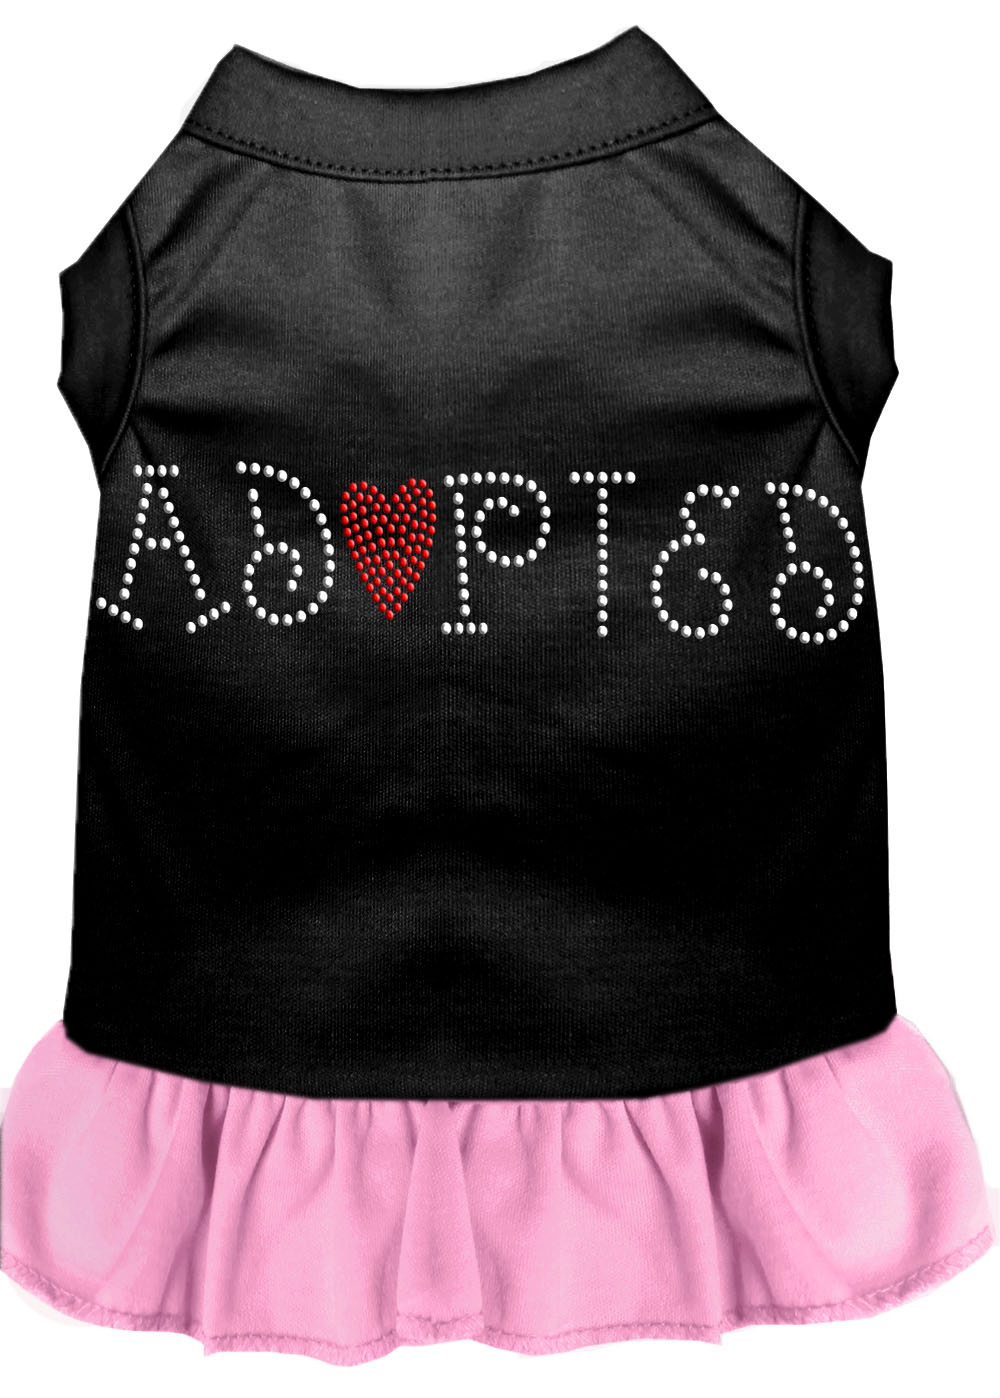 Adopted Rhinestone Dresses Black with Light Pink Sm